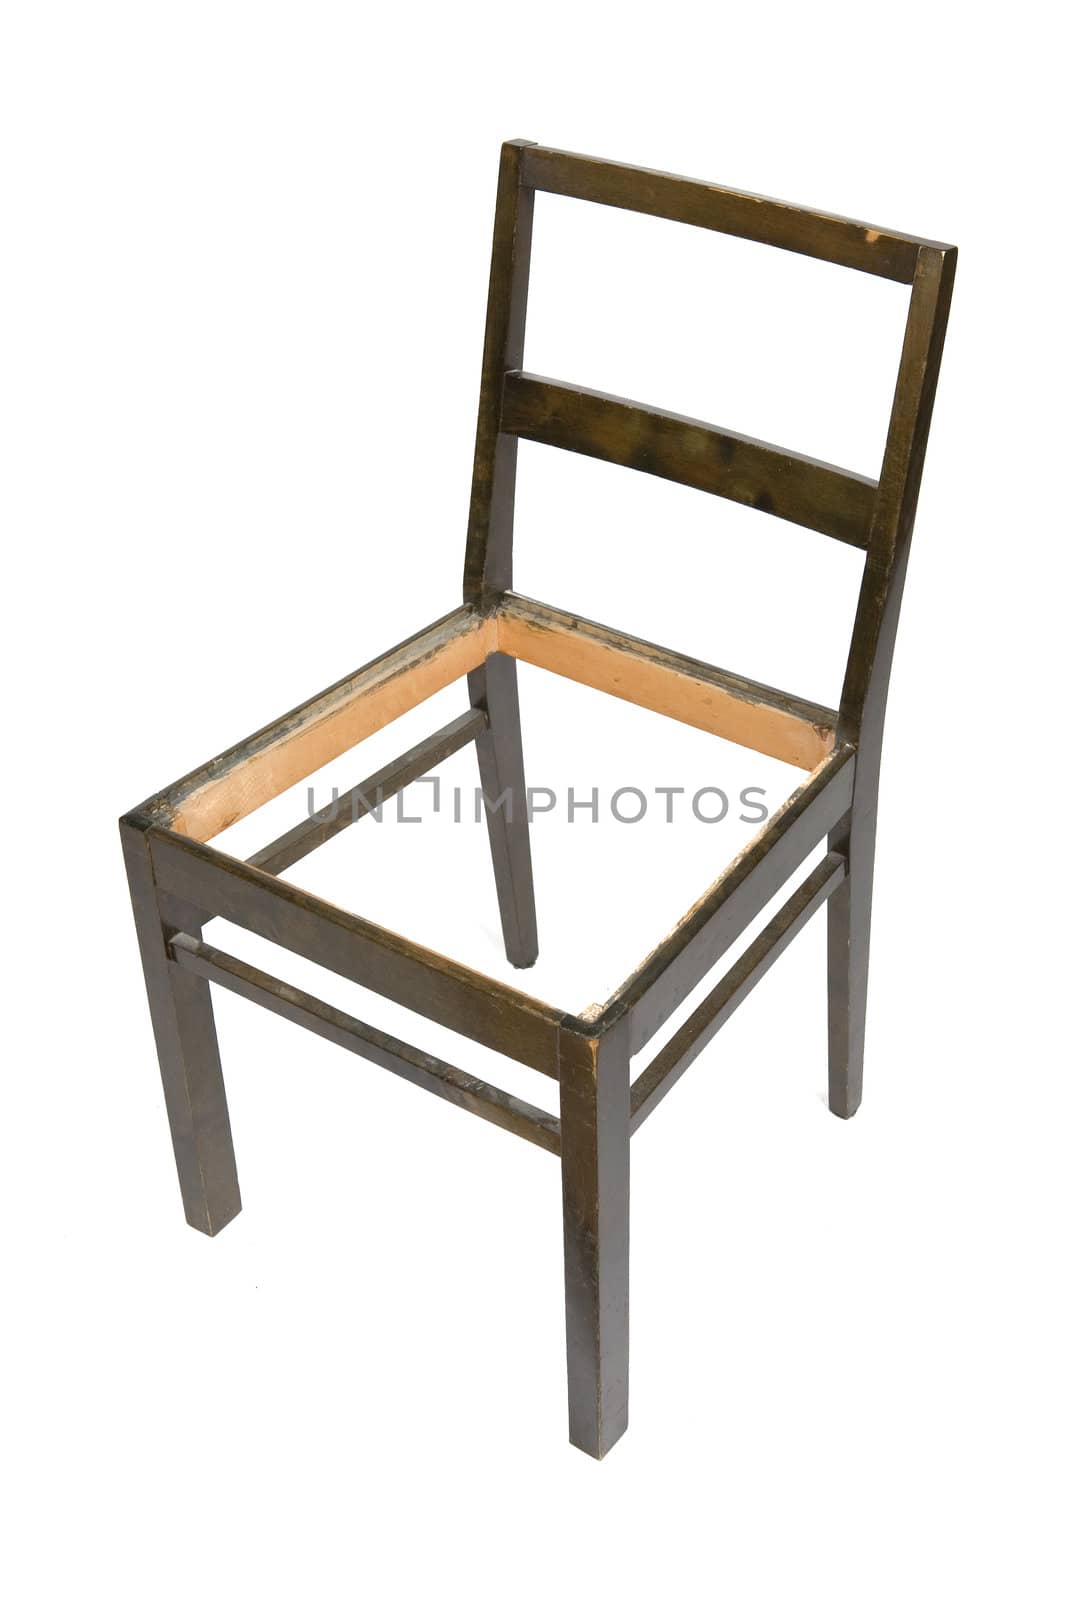 Old chair in need of restoration isolated on a white background